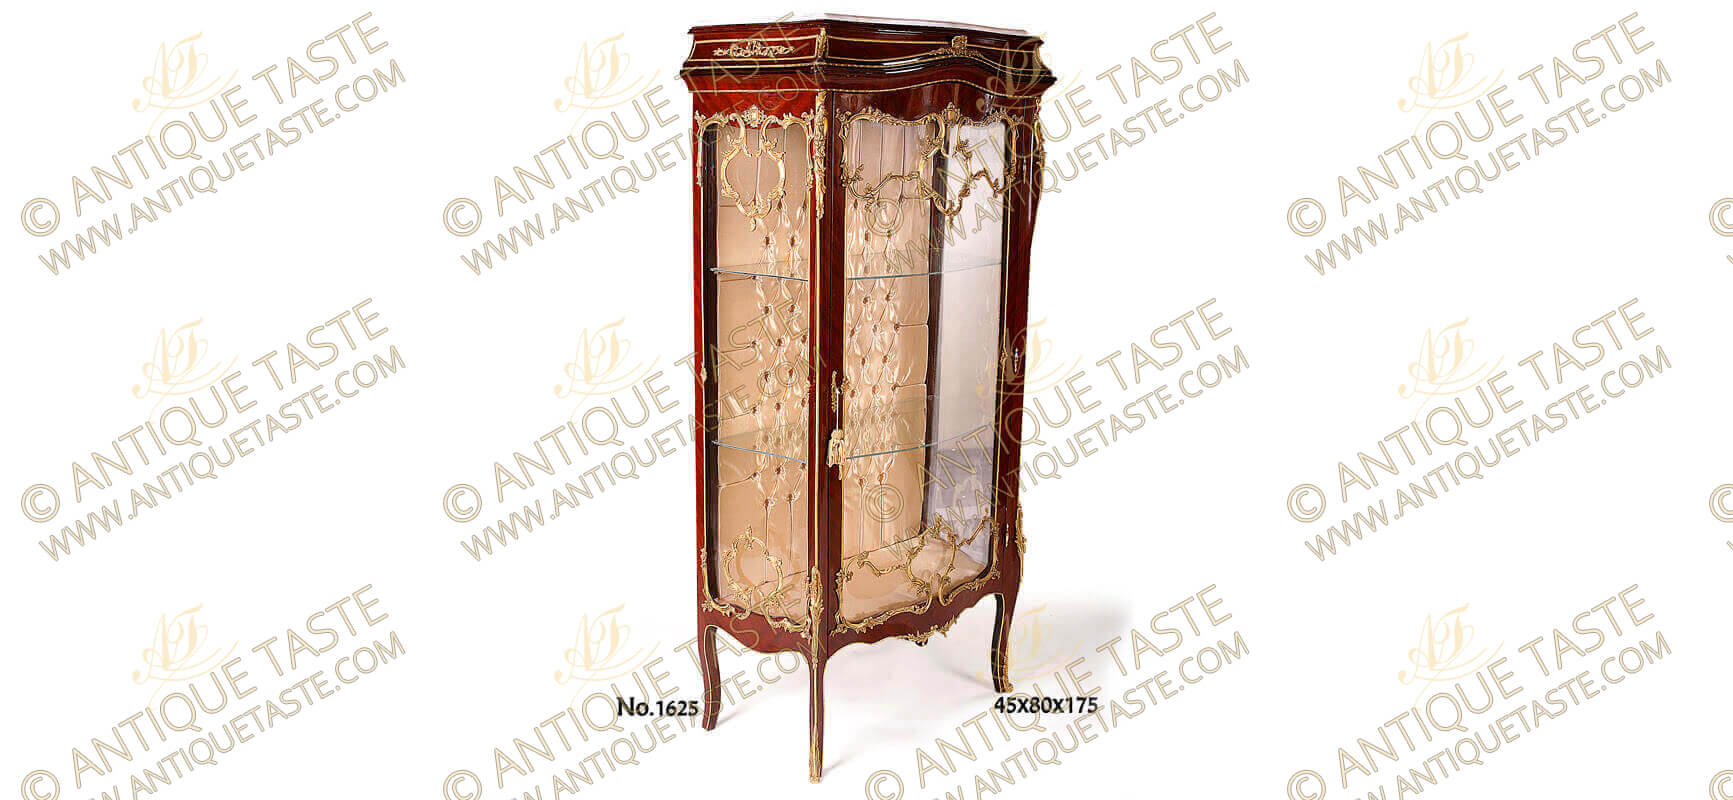 French style Furniture Reproductions Display Vitrine, Louis Louis XVI XV Cabinet, Corner